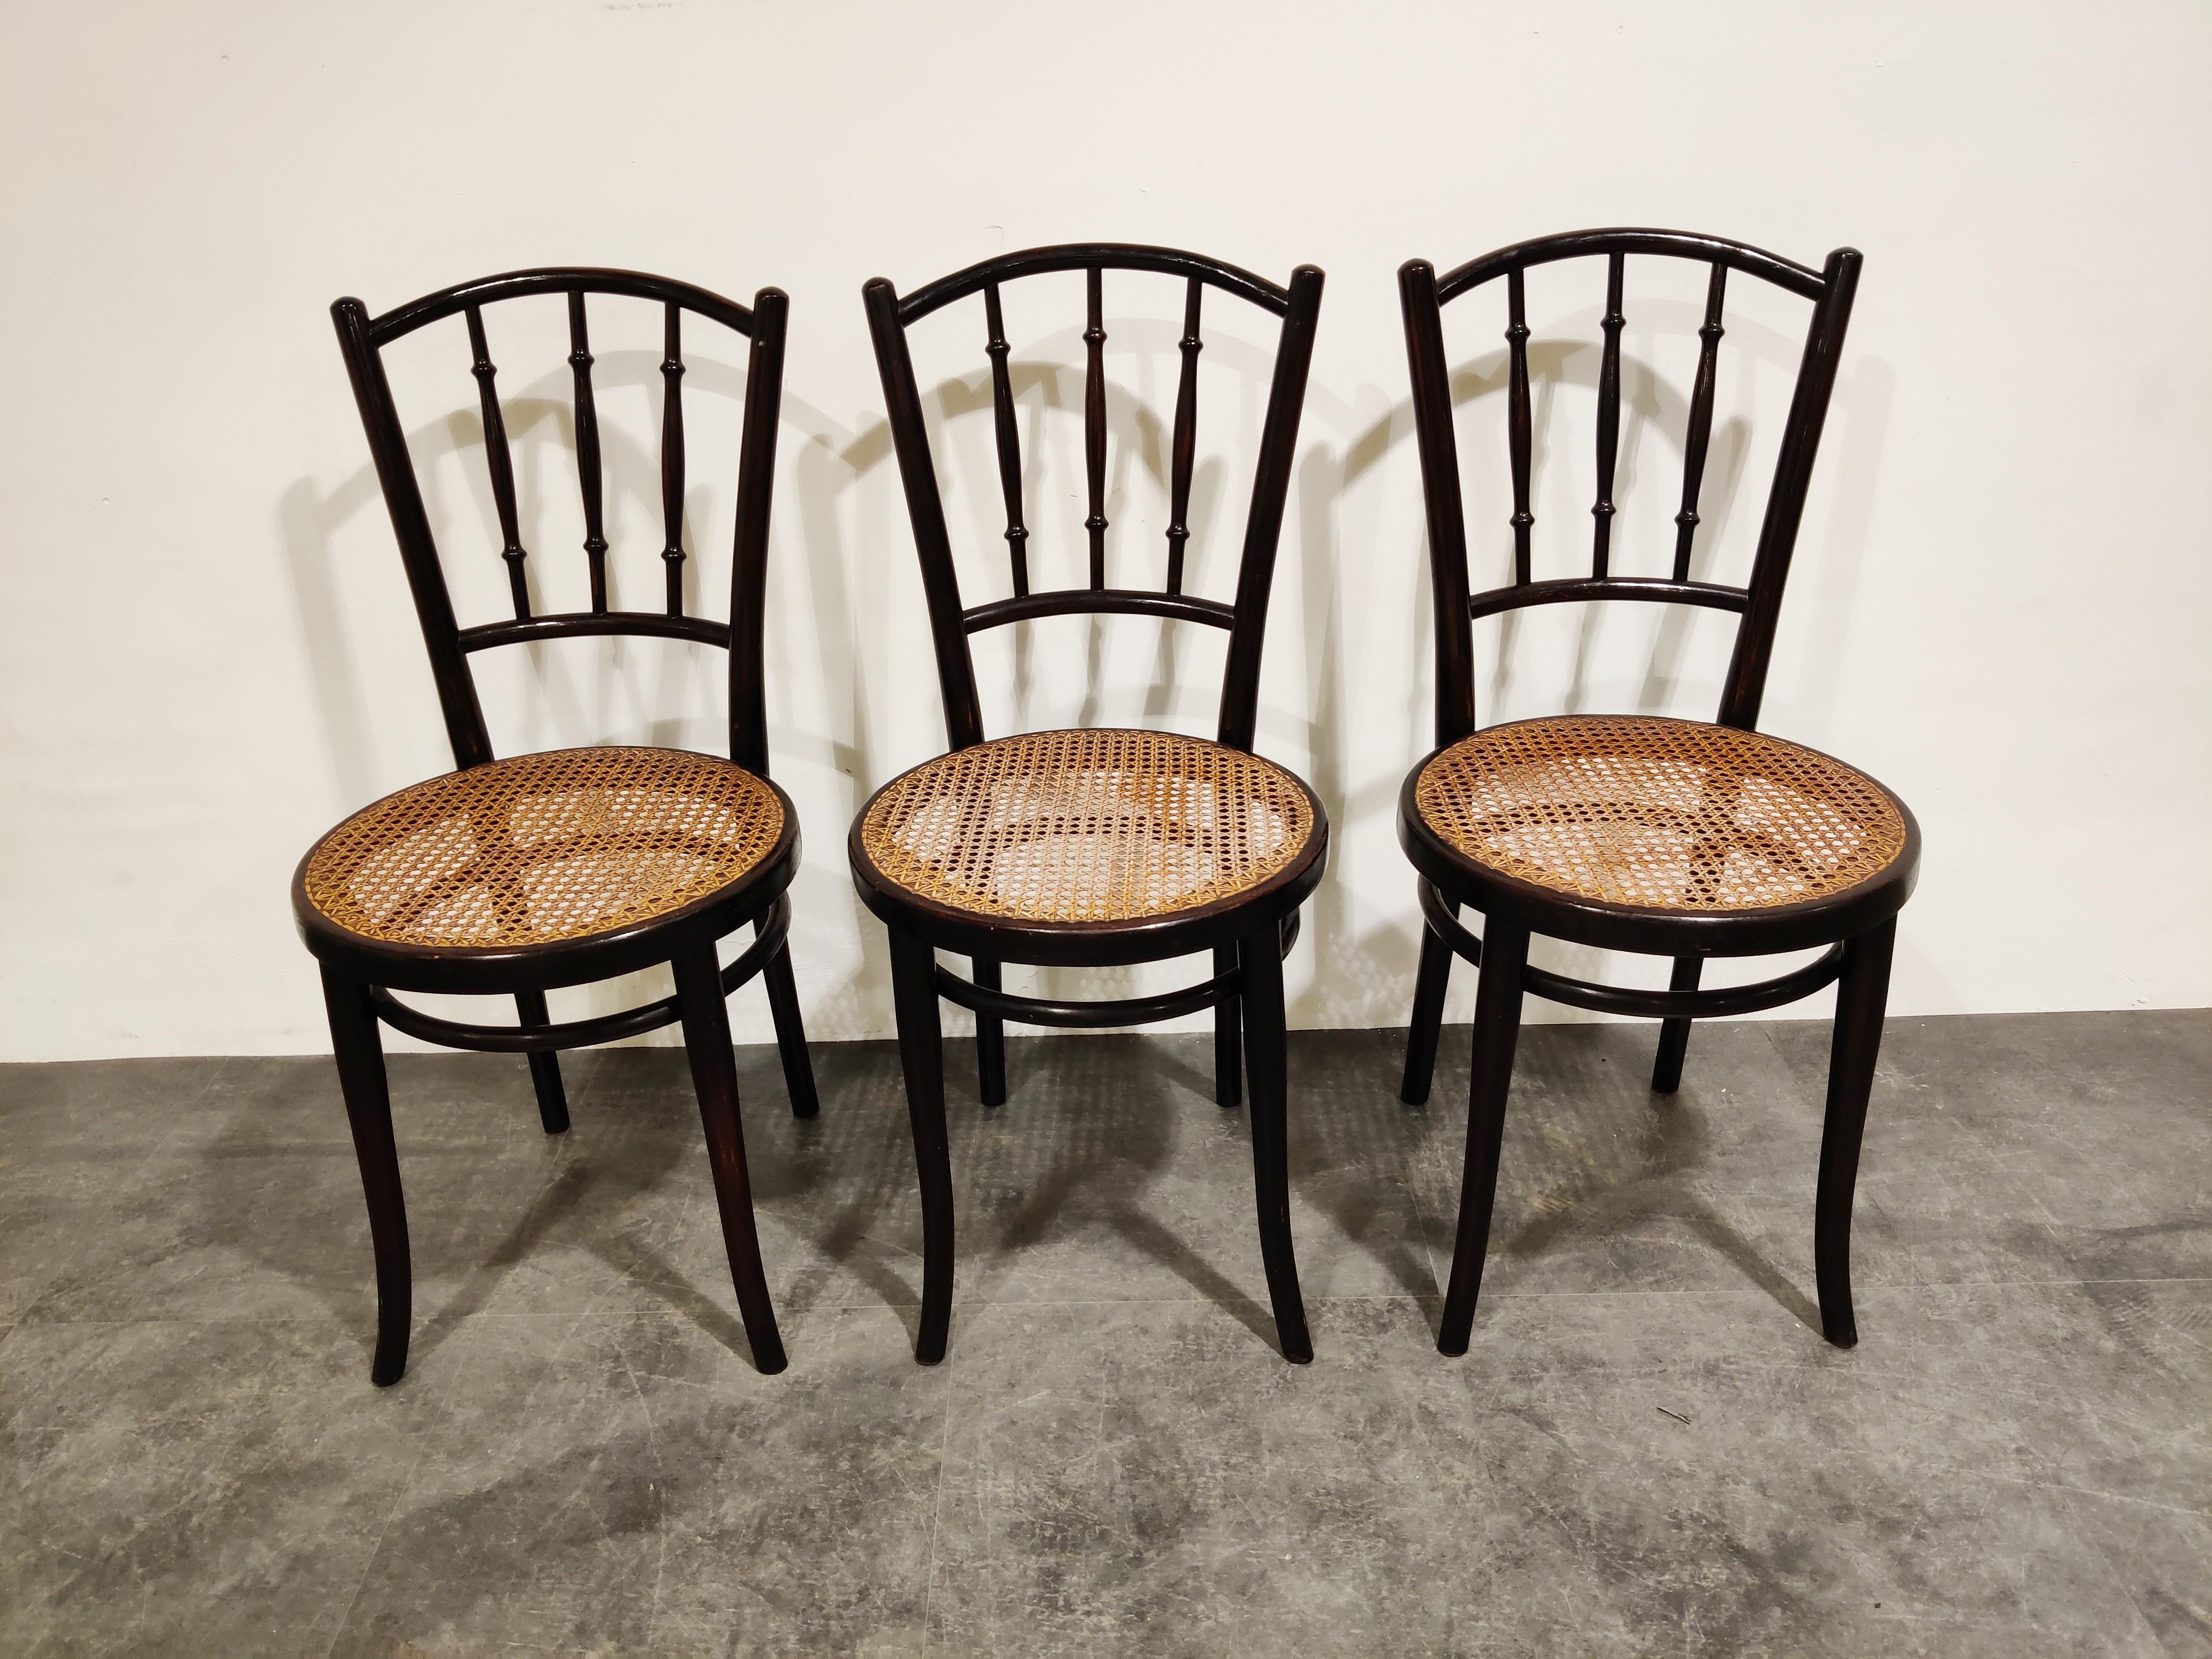 Austrian Set of 6 Bentwood Chairs by Thonet, 1920s, Austria